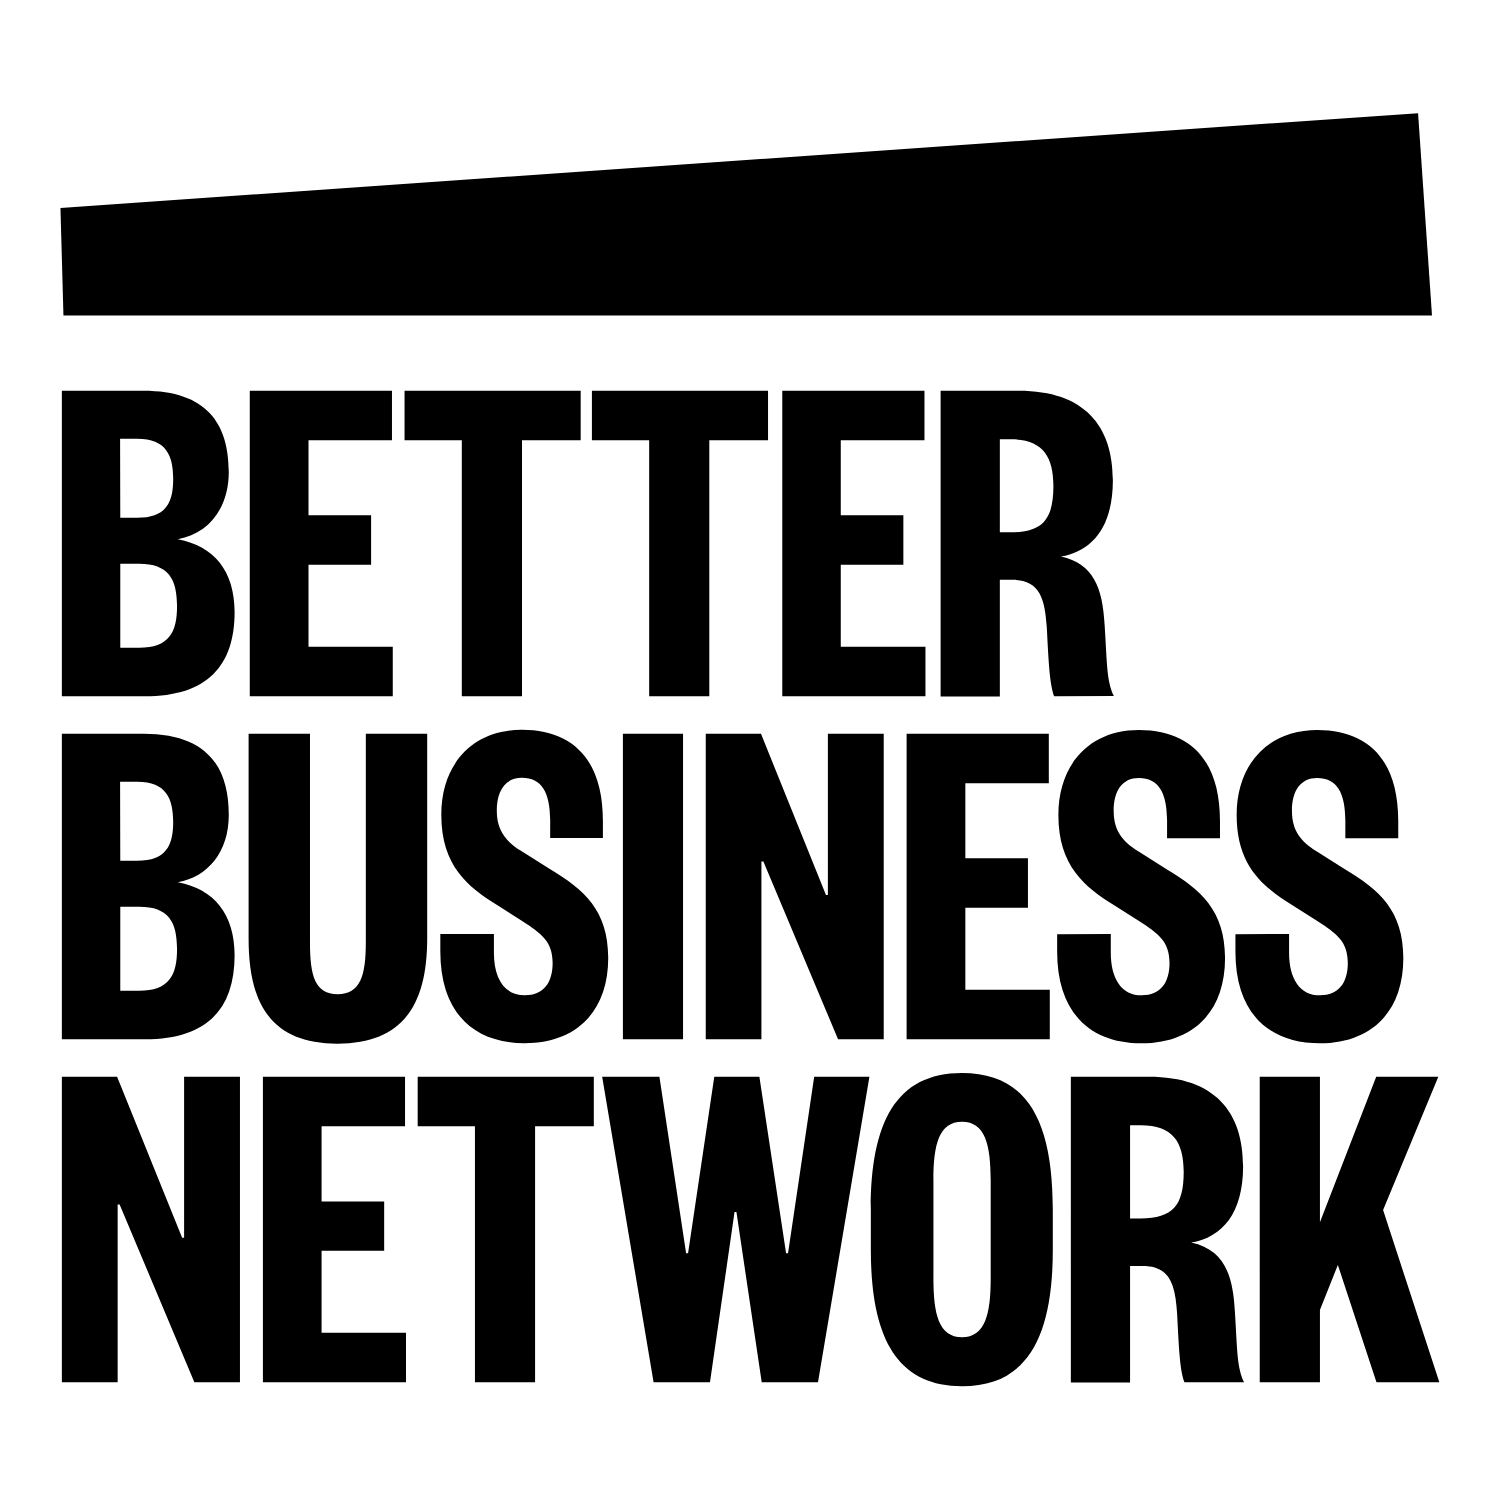 Joining the Better Business Network